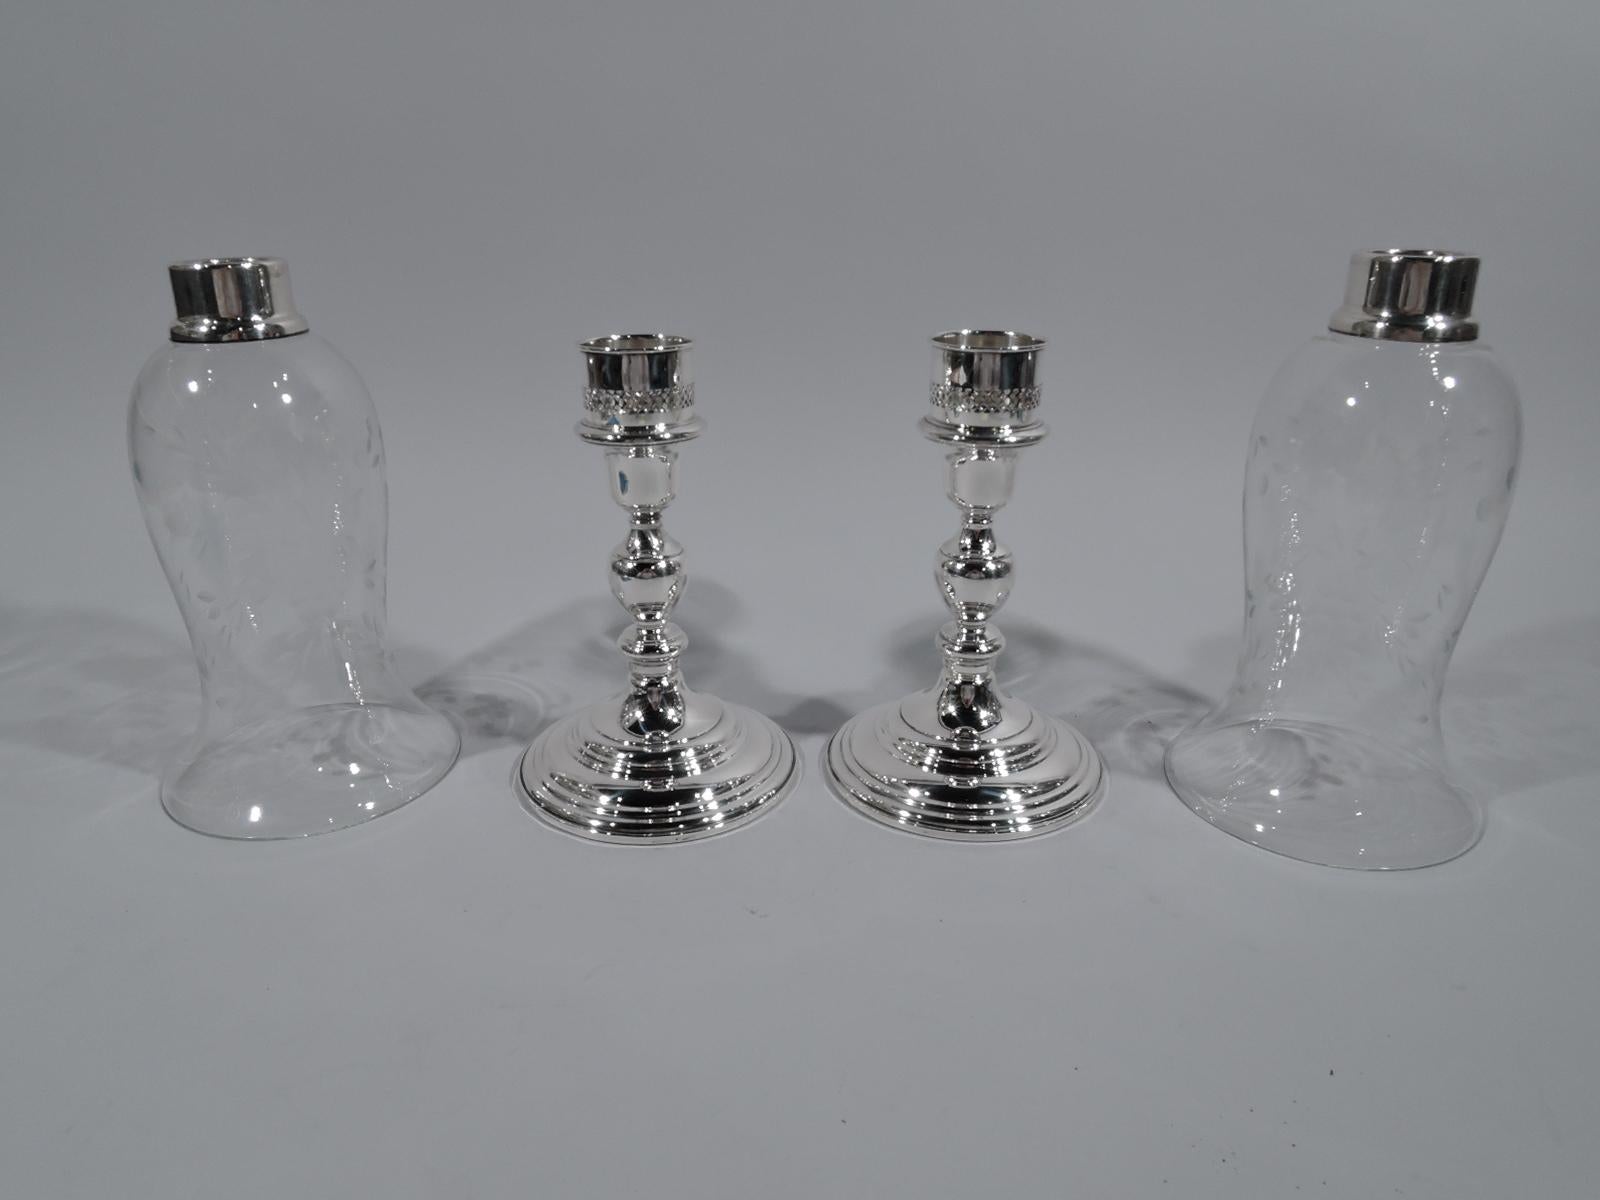 Pair of sterling silver candlesticks with glass shades, circa 1940. Retailed by Cartier in New York. Each: Baluster shaft on stepped and raised foot engraved with script monogram. Shades ovoid with flared rim; acid-etched stylized flowers. Perfect